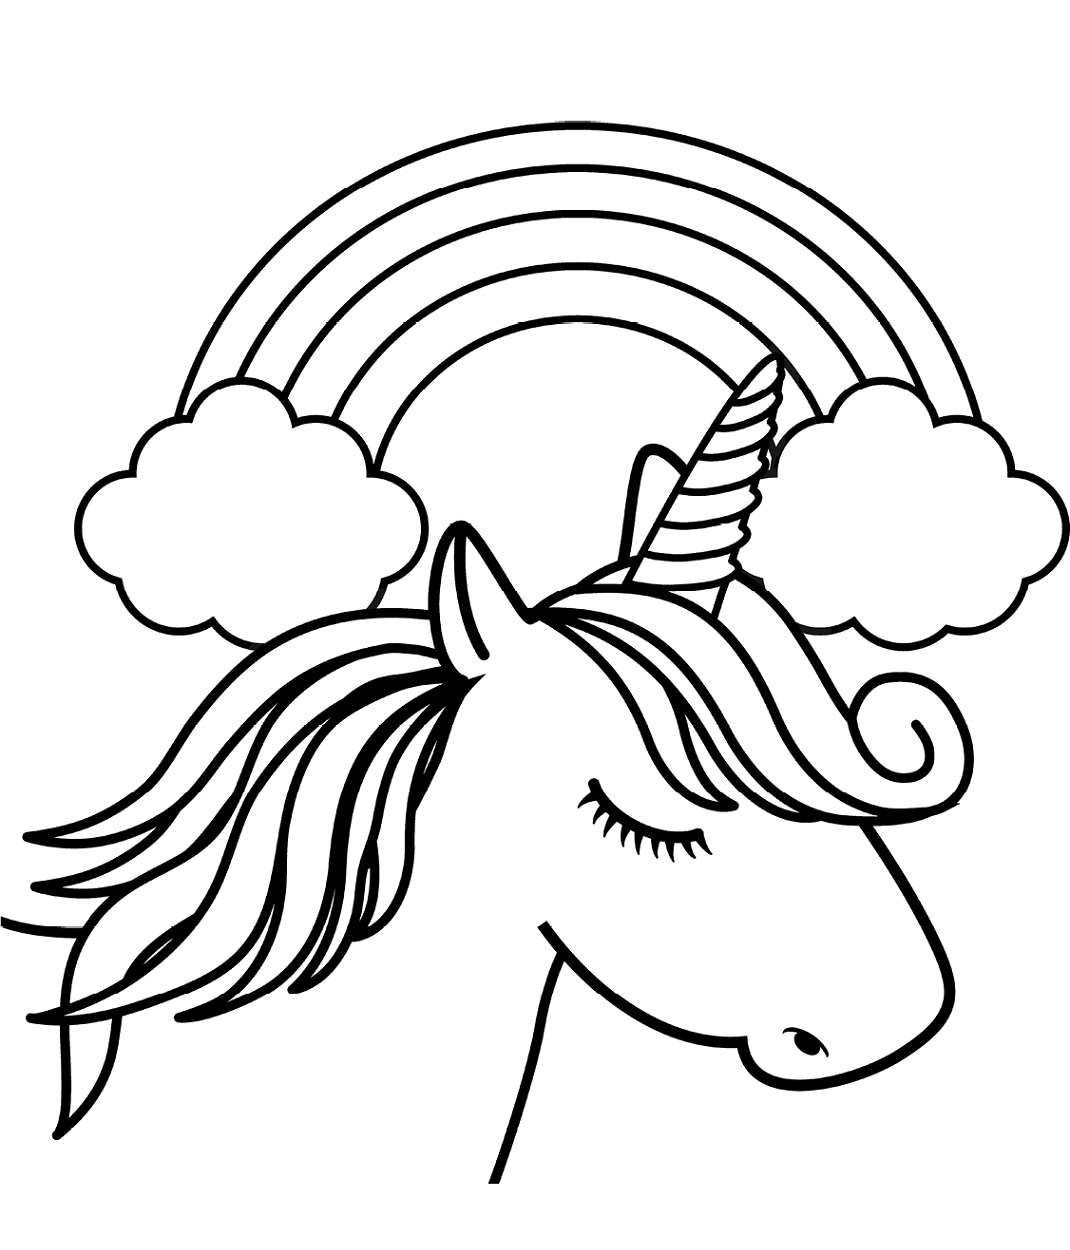 Unicorn Head In Front Of Rainbow Coloring Pages   Coloring Cool